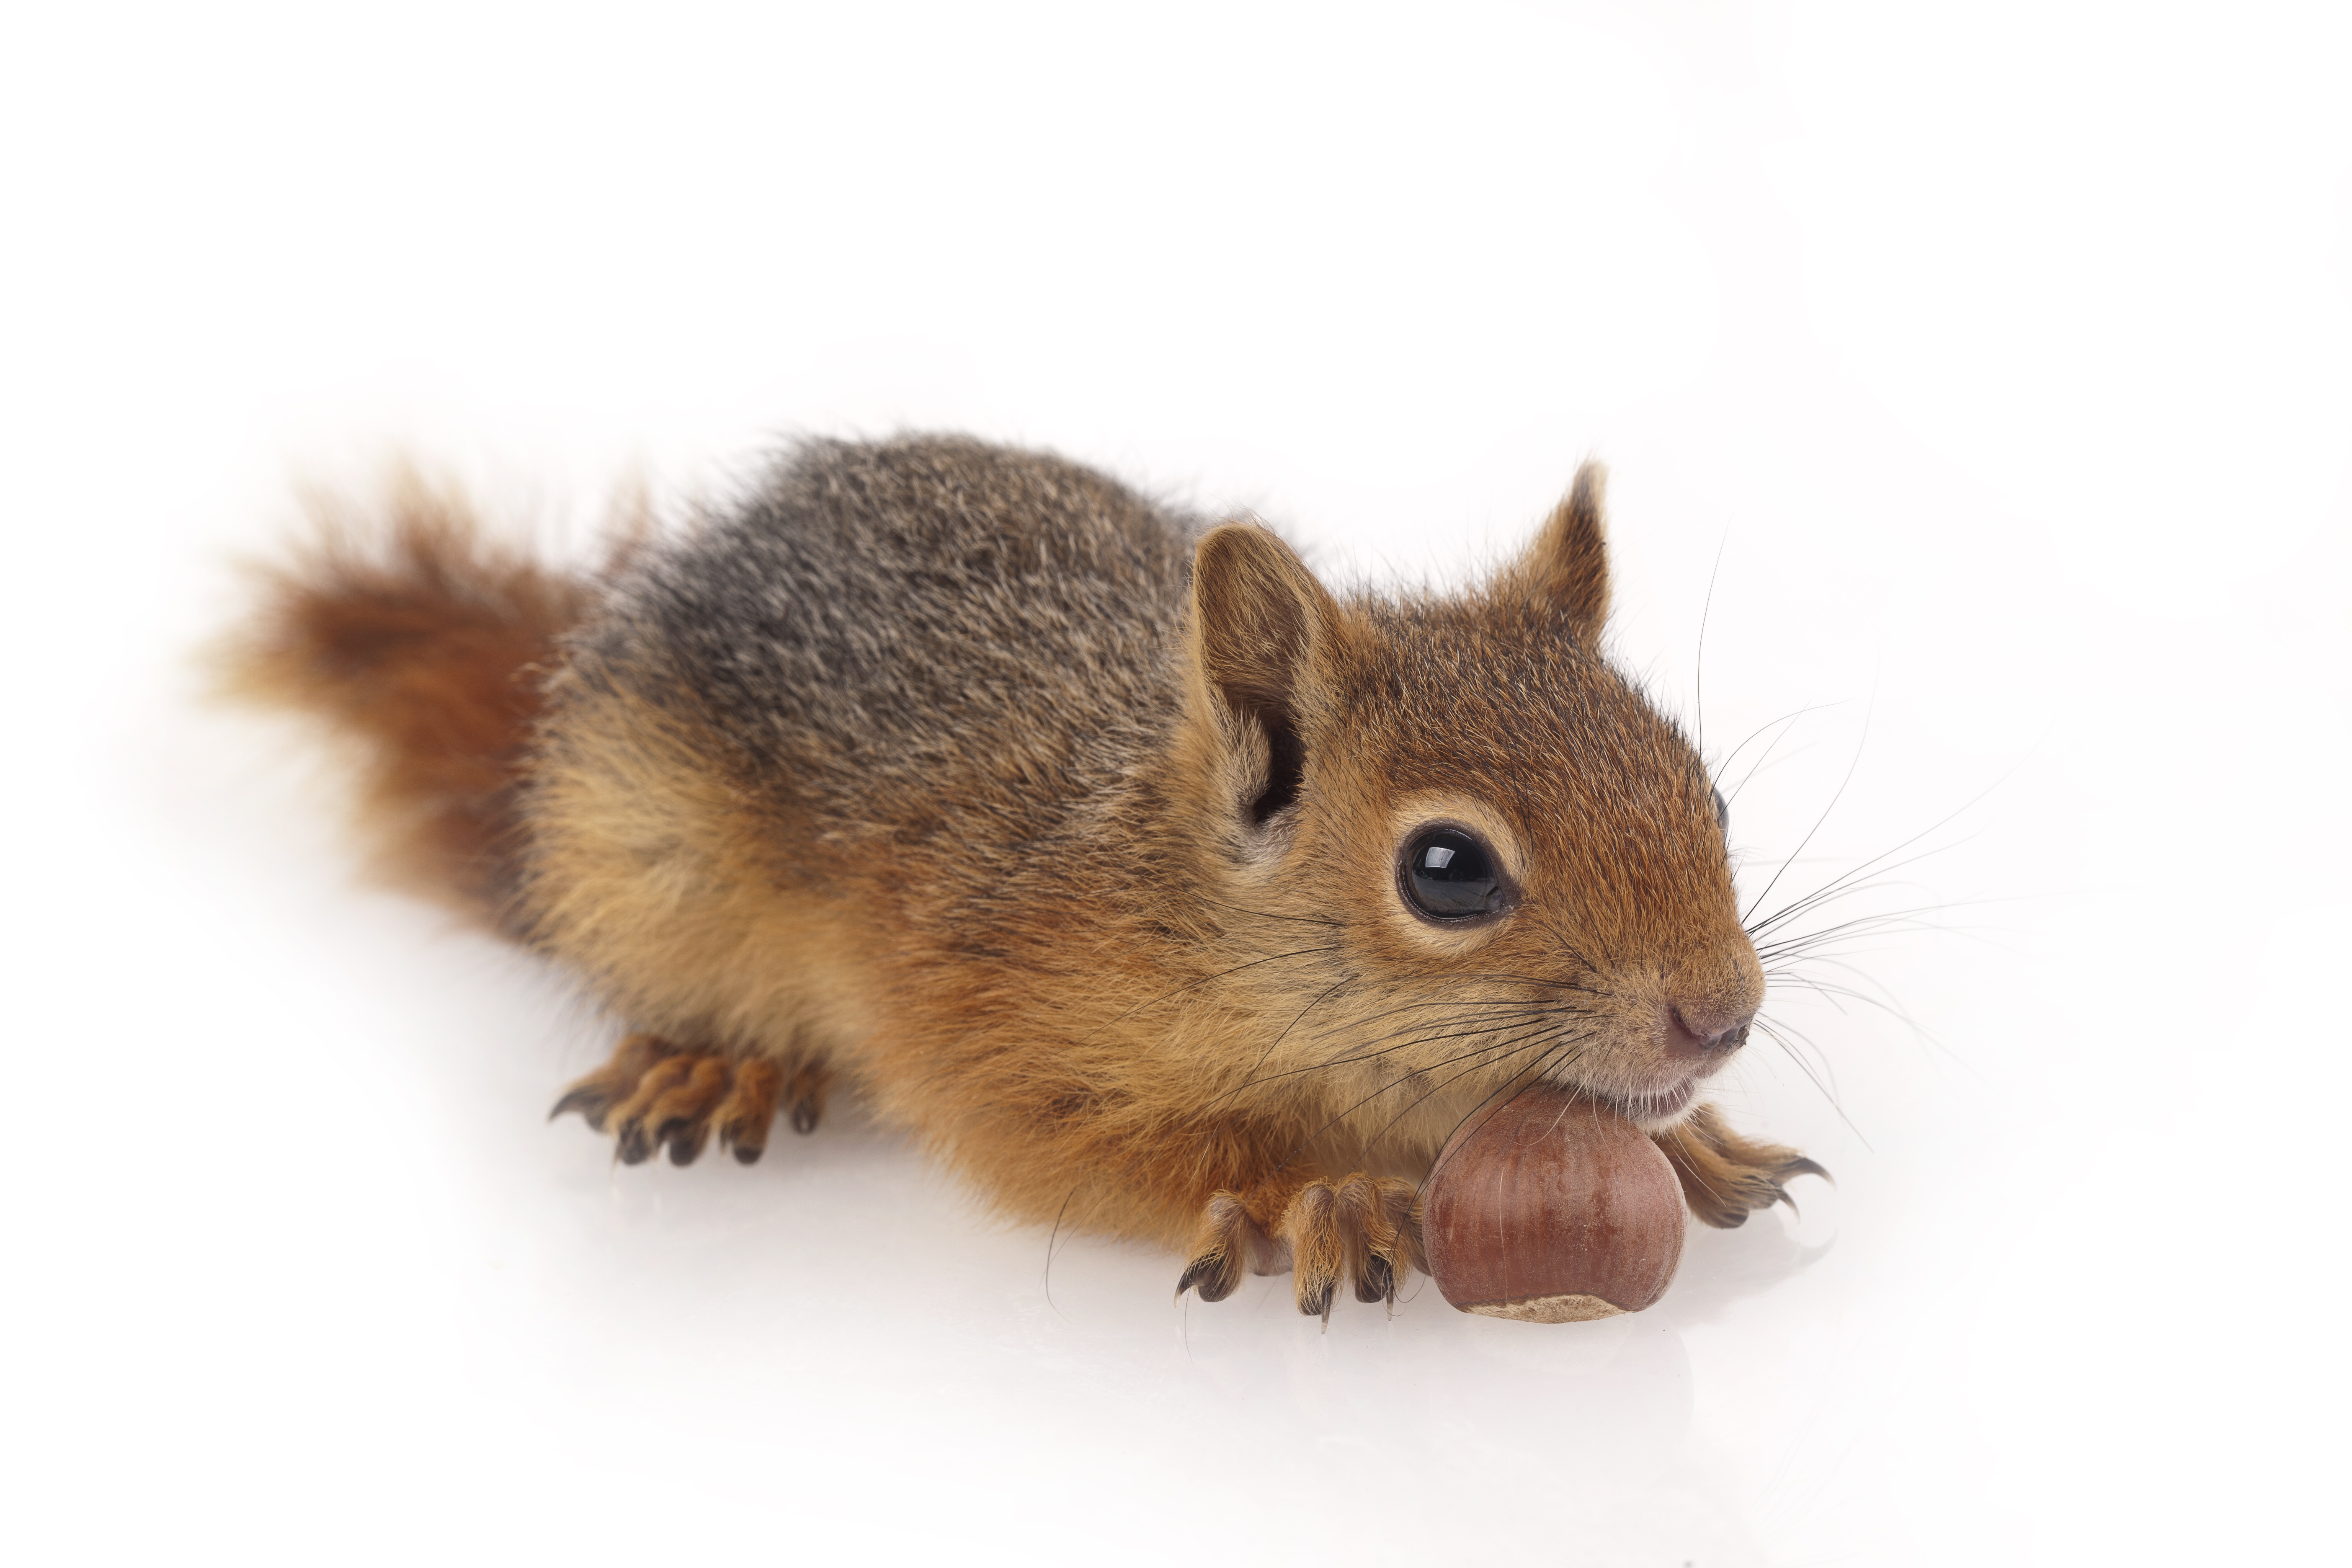 Wallpapers animal squirrels nuts on the desktop